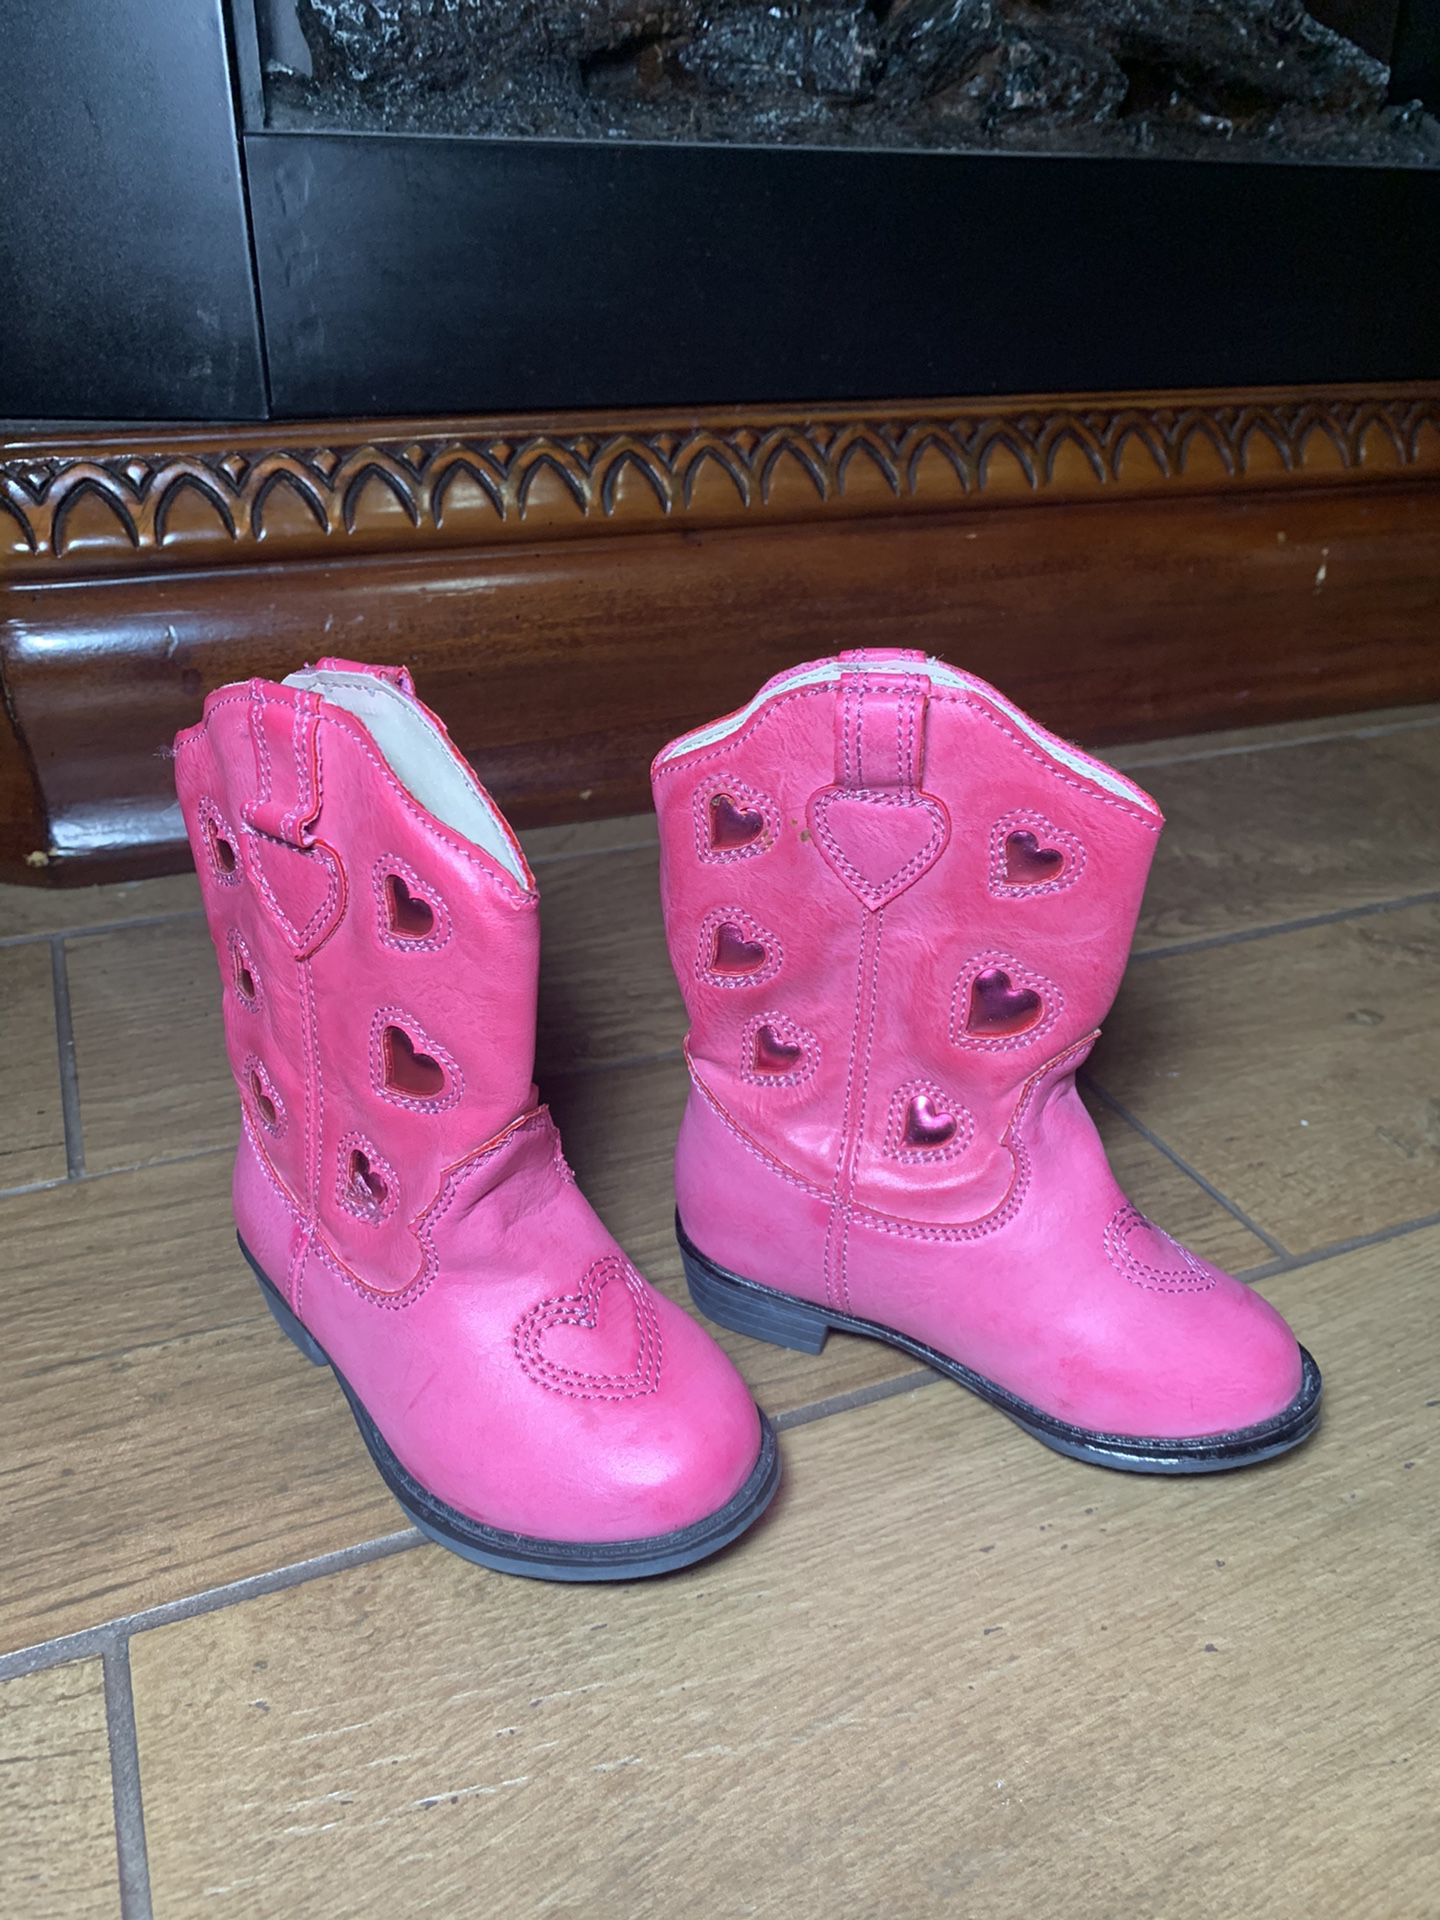 Toddler Jessica Simpson cowgirl boots size 6M